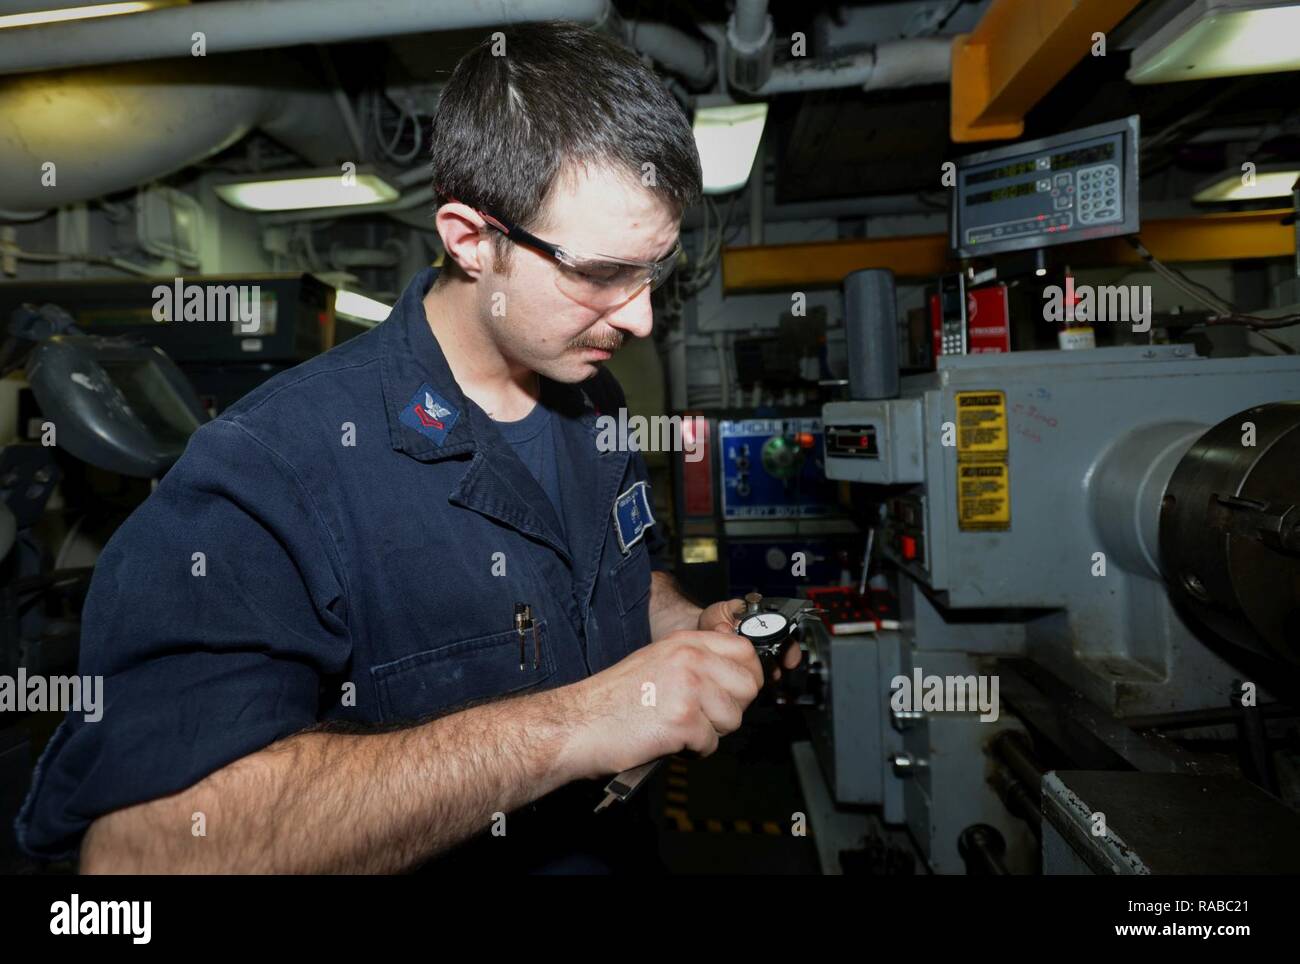 ATLANTIC OCEAN (Jan. 13, 2017) – Machinery Repairman 2nd Class Tim Grover, a native of Hillsboro, Oregon, measures the size of a newly cut shaft in the Machine Shop aboard the Wasp-class multipurpose amphibious assault ship USS Bataan (LHD 5). Bataan is underway conducting Composite Training Unit Exercise (COMPTUEX) with the Bataan Amphibious Ready Group in preparation for an upcoming deployment. Stock Photo